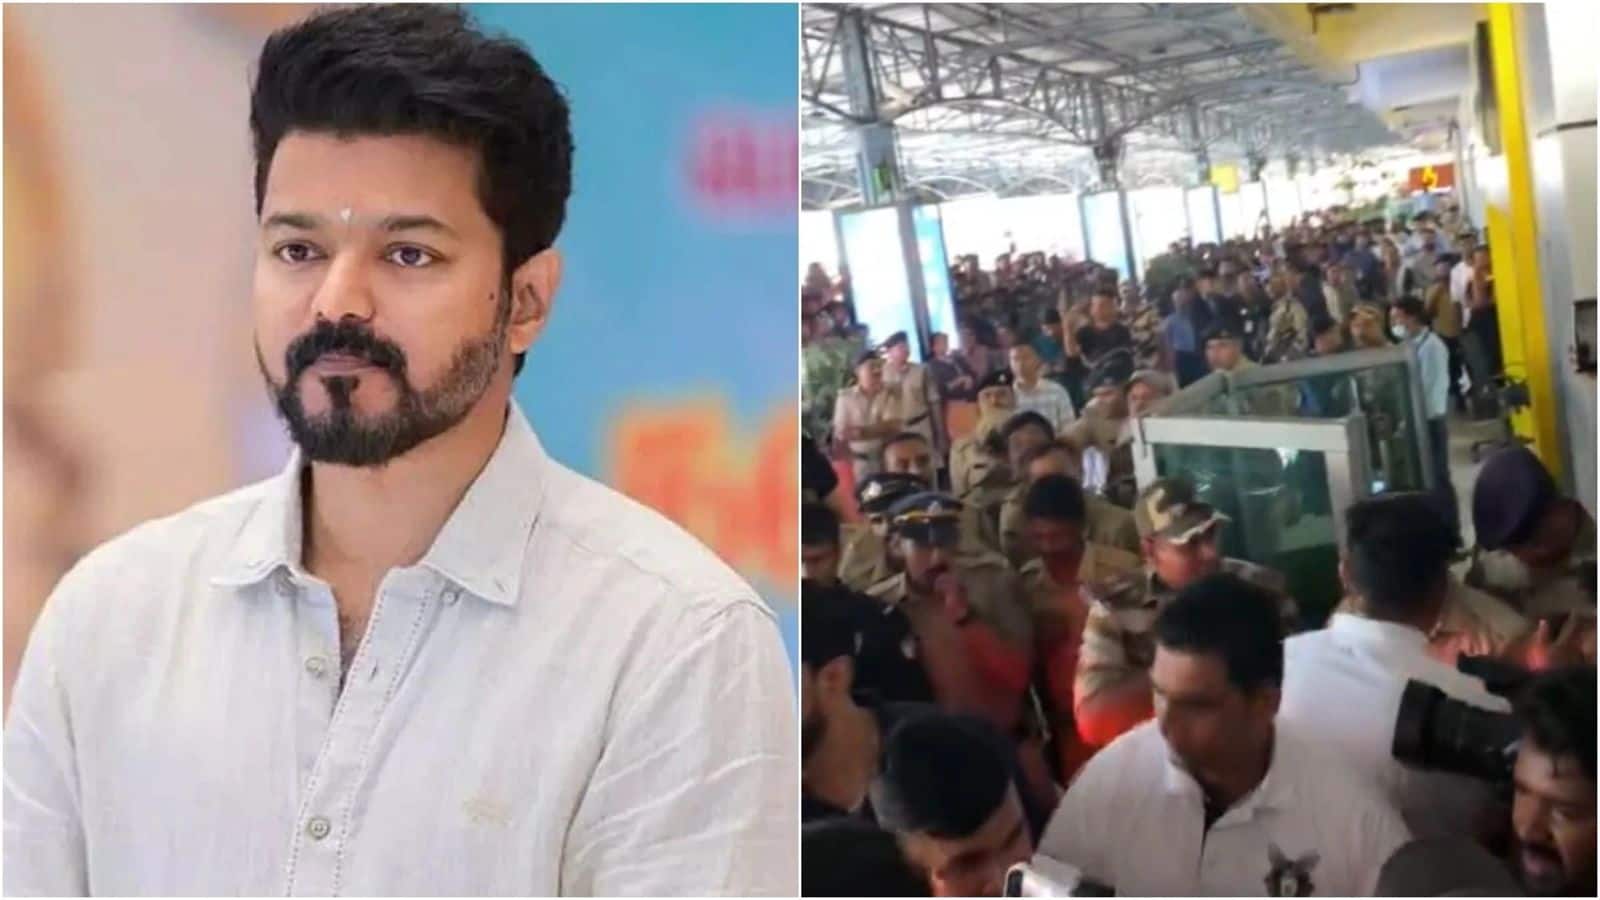 'Thalapathy' Vijay returns to Kerala for 'GOAT' after 14 years